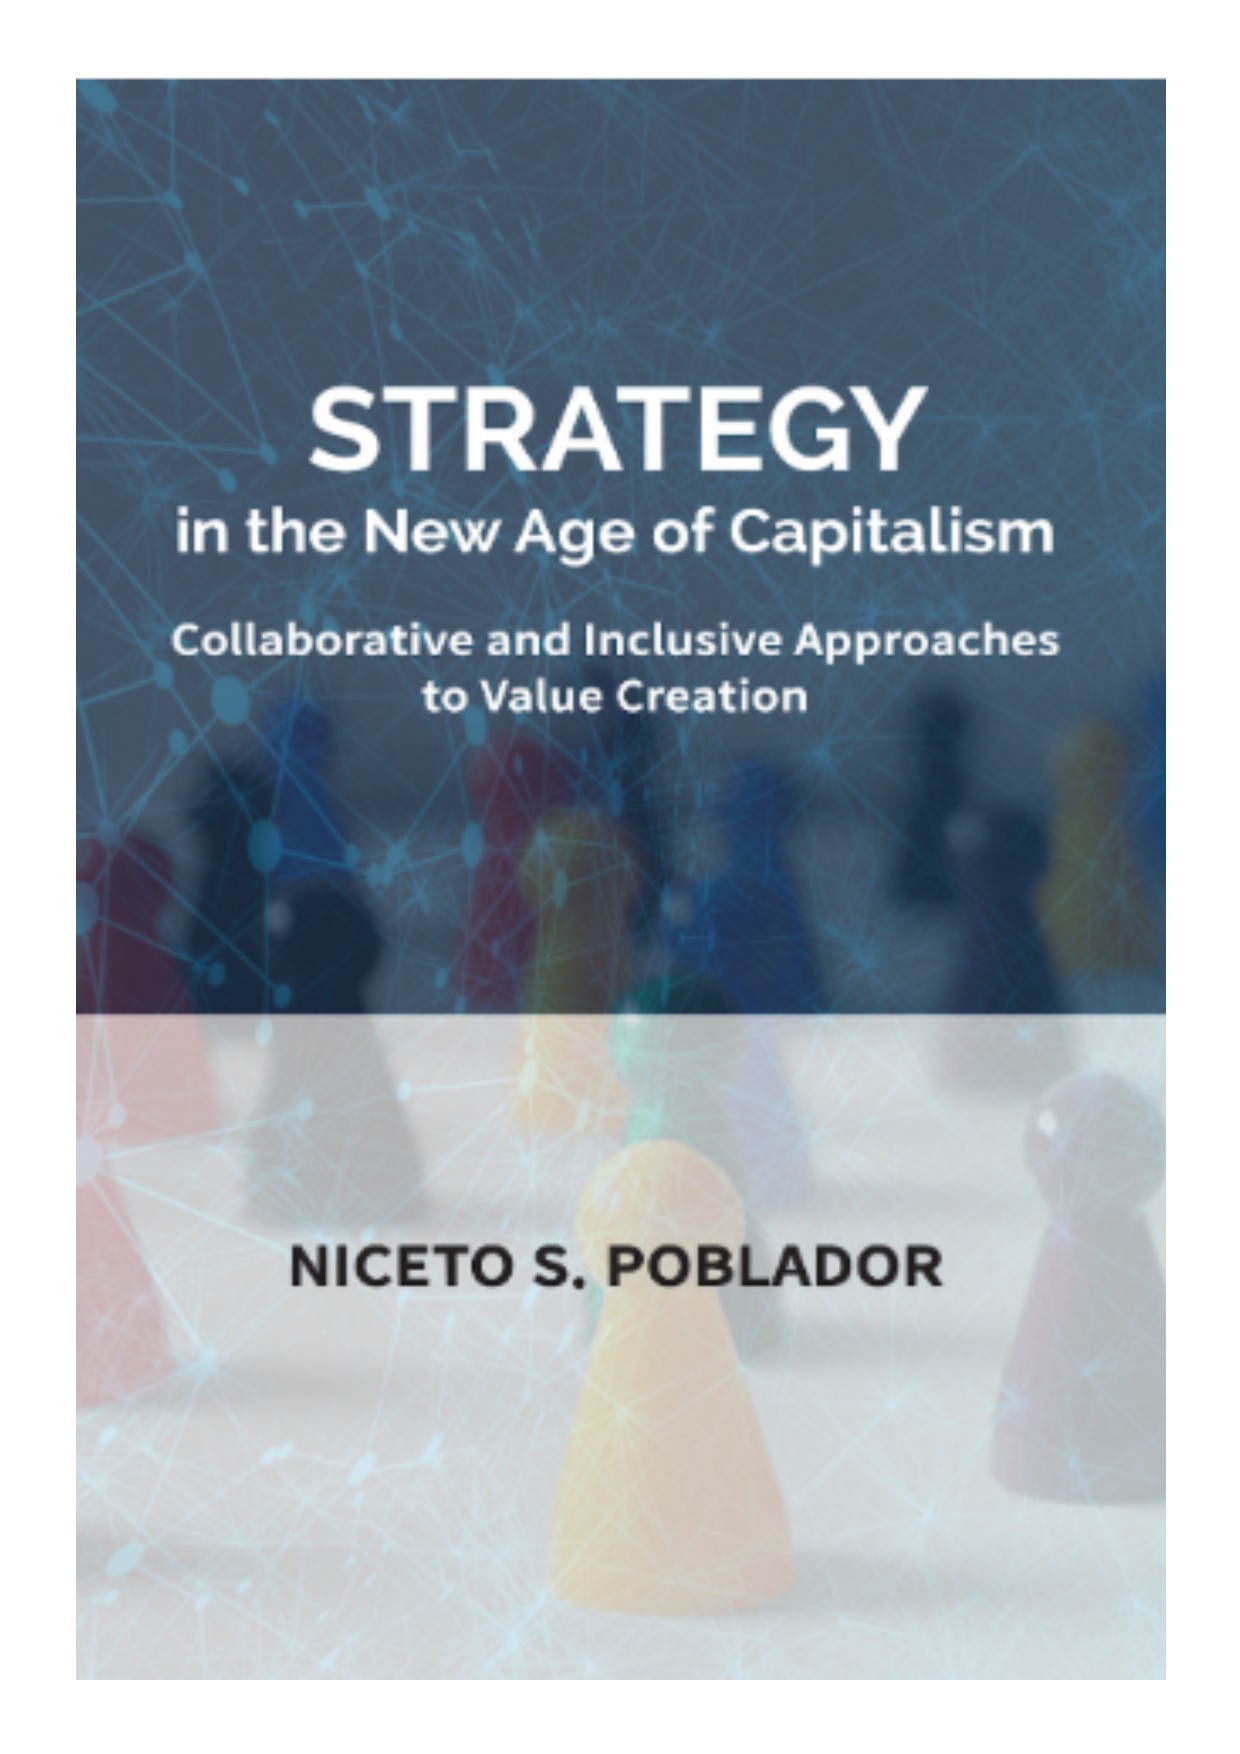 Strategy in the new age of capitalism collaborative and inclusive approaches to value creation